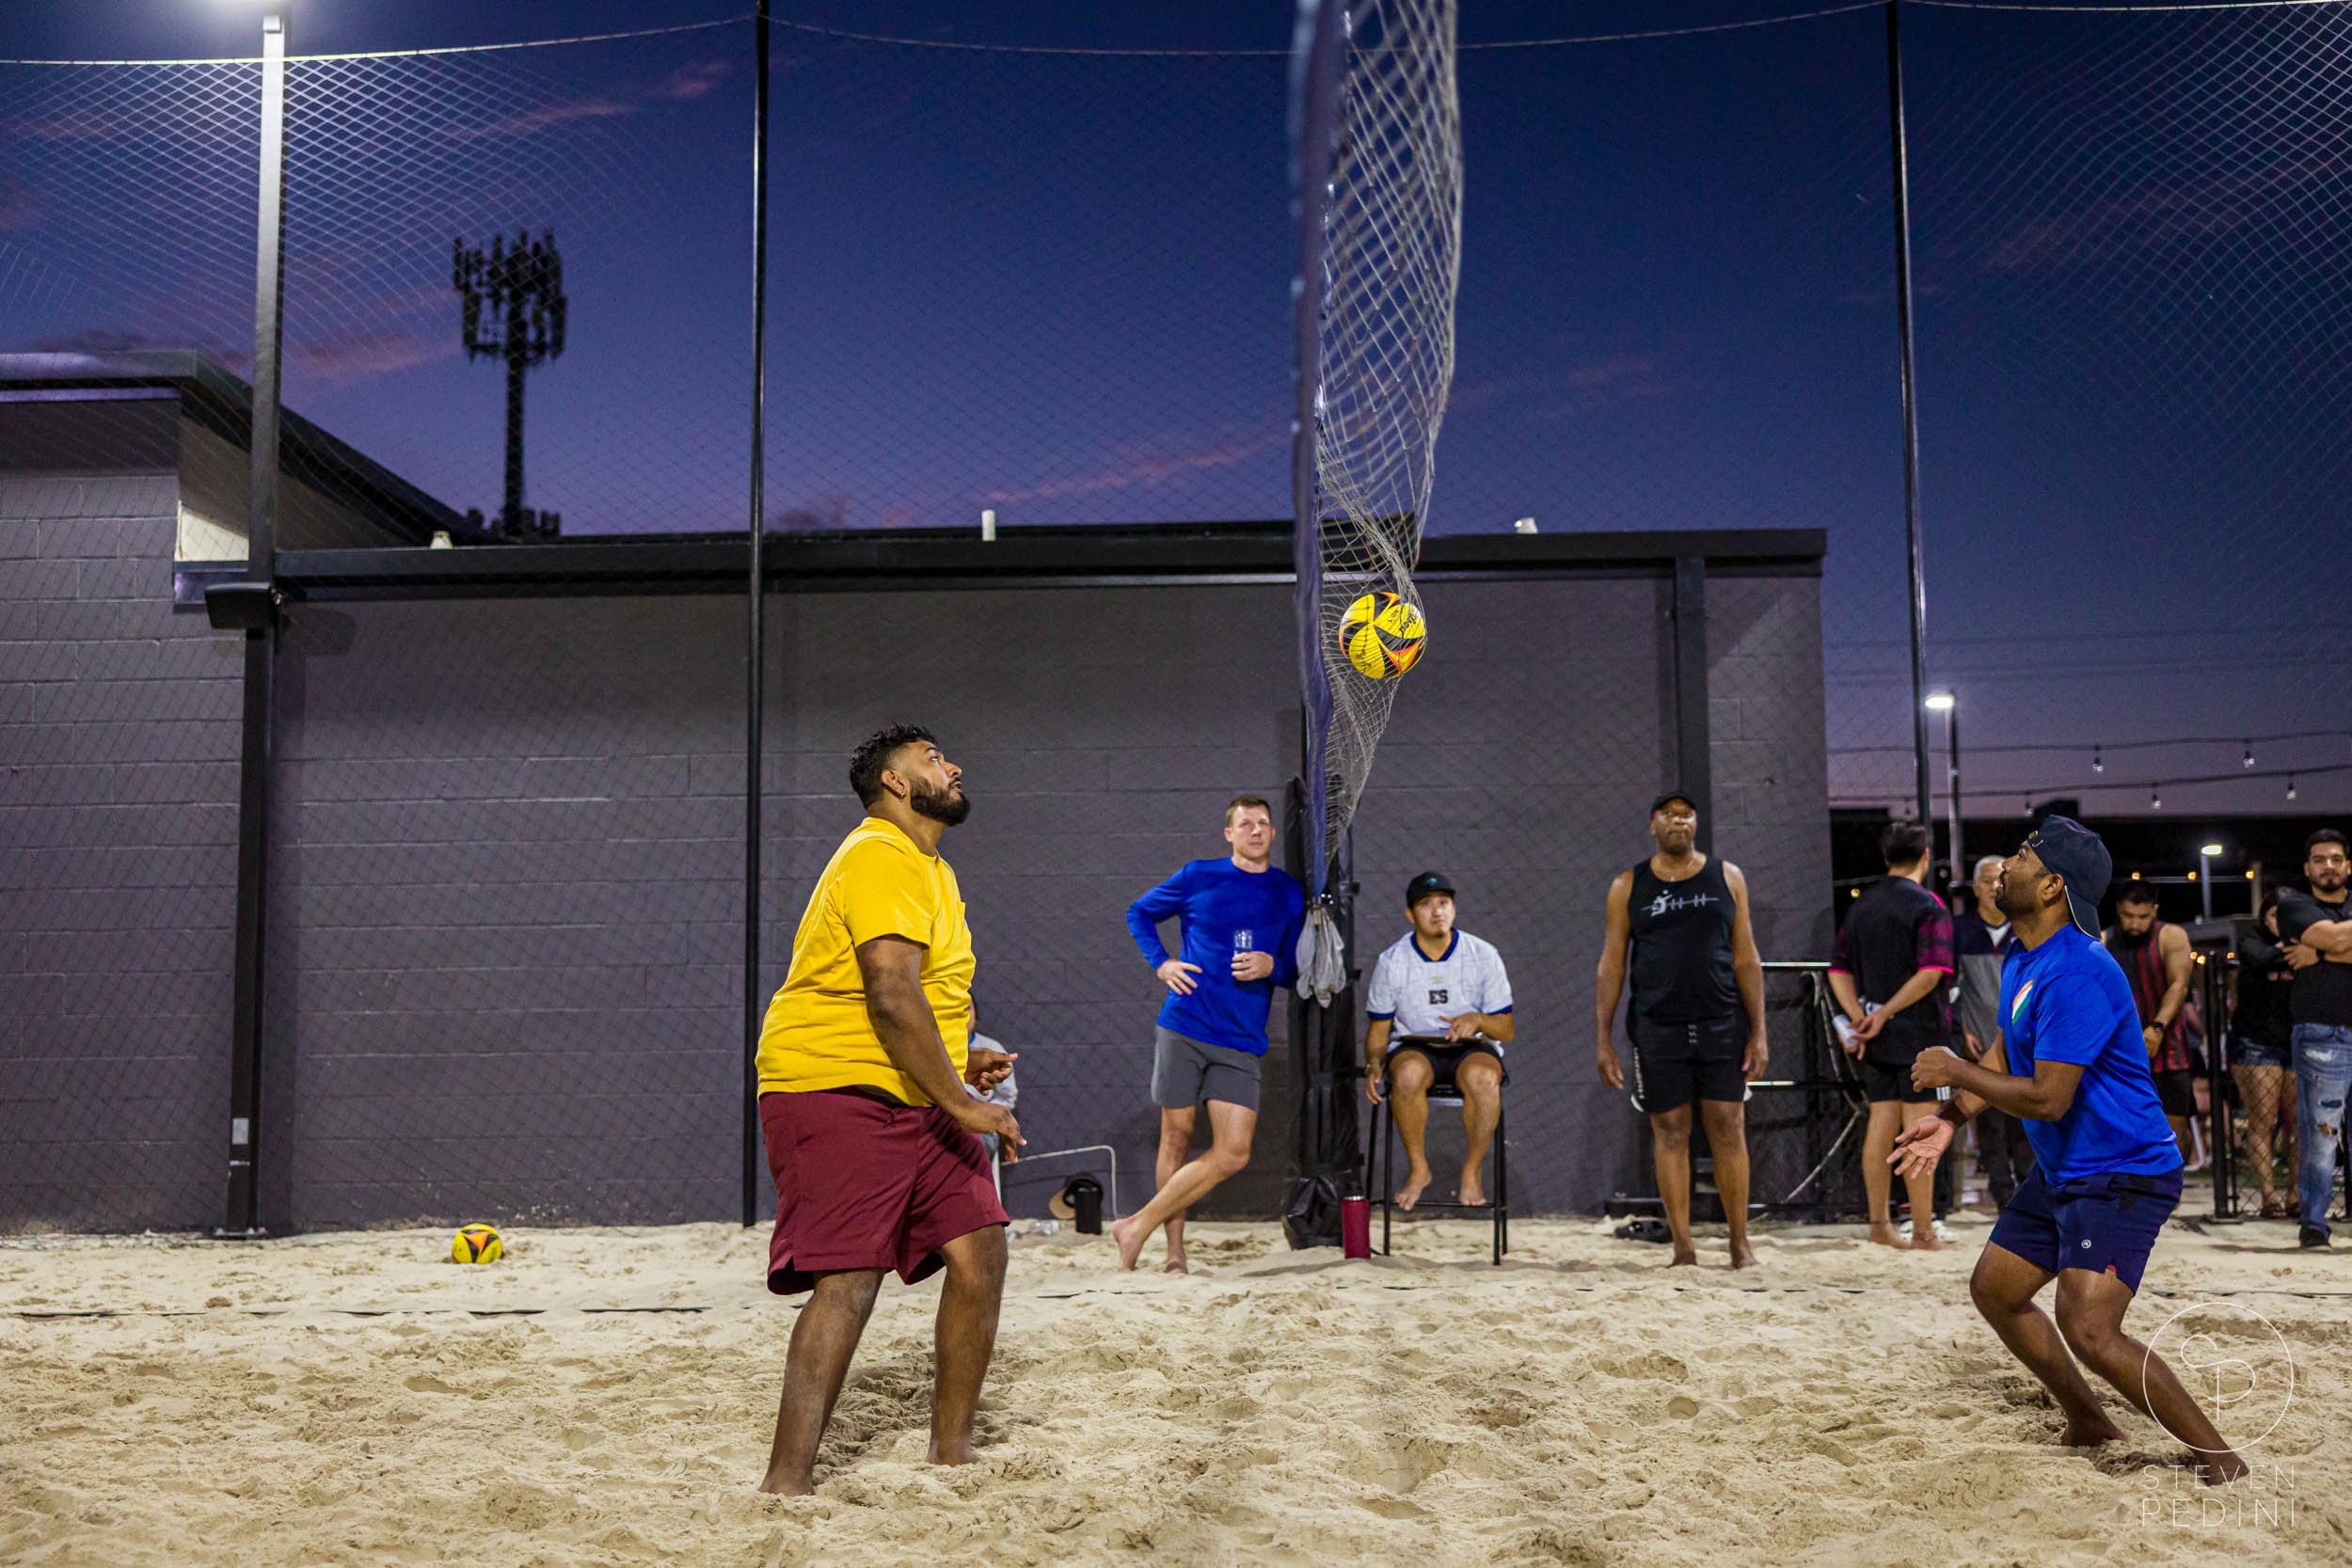 Steven Pedini Photography - Bumpy Pickle - Sand Volleyball - Houston TX - World Cup of Volleyball - 00332.jpg